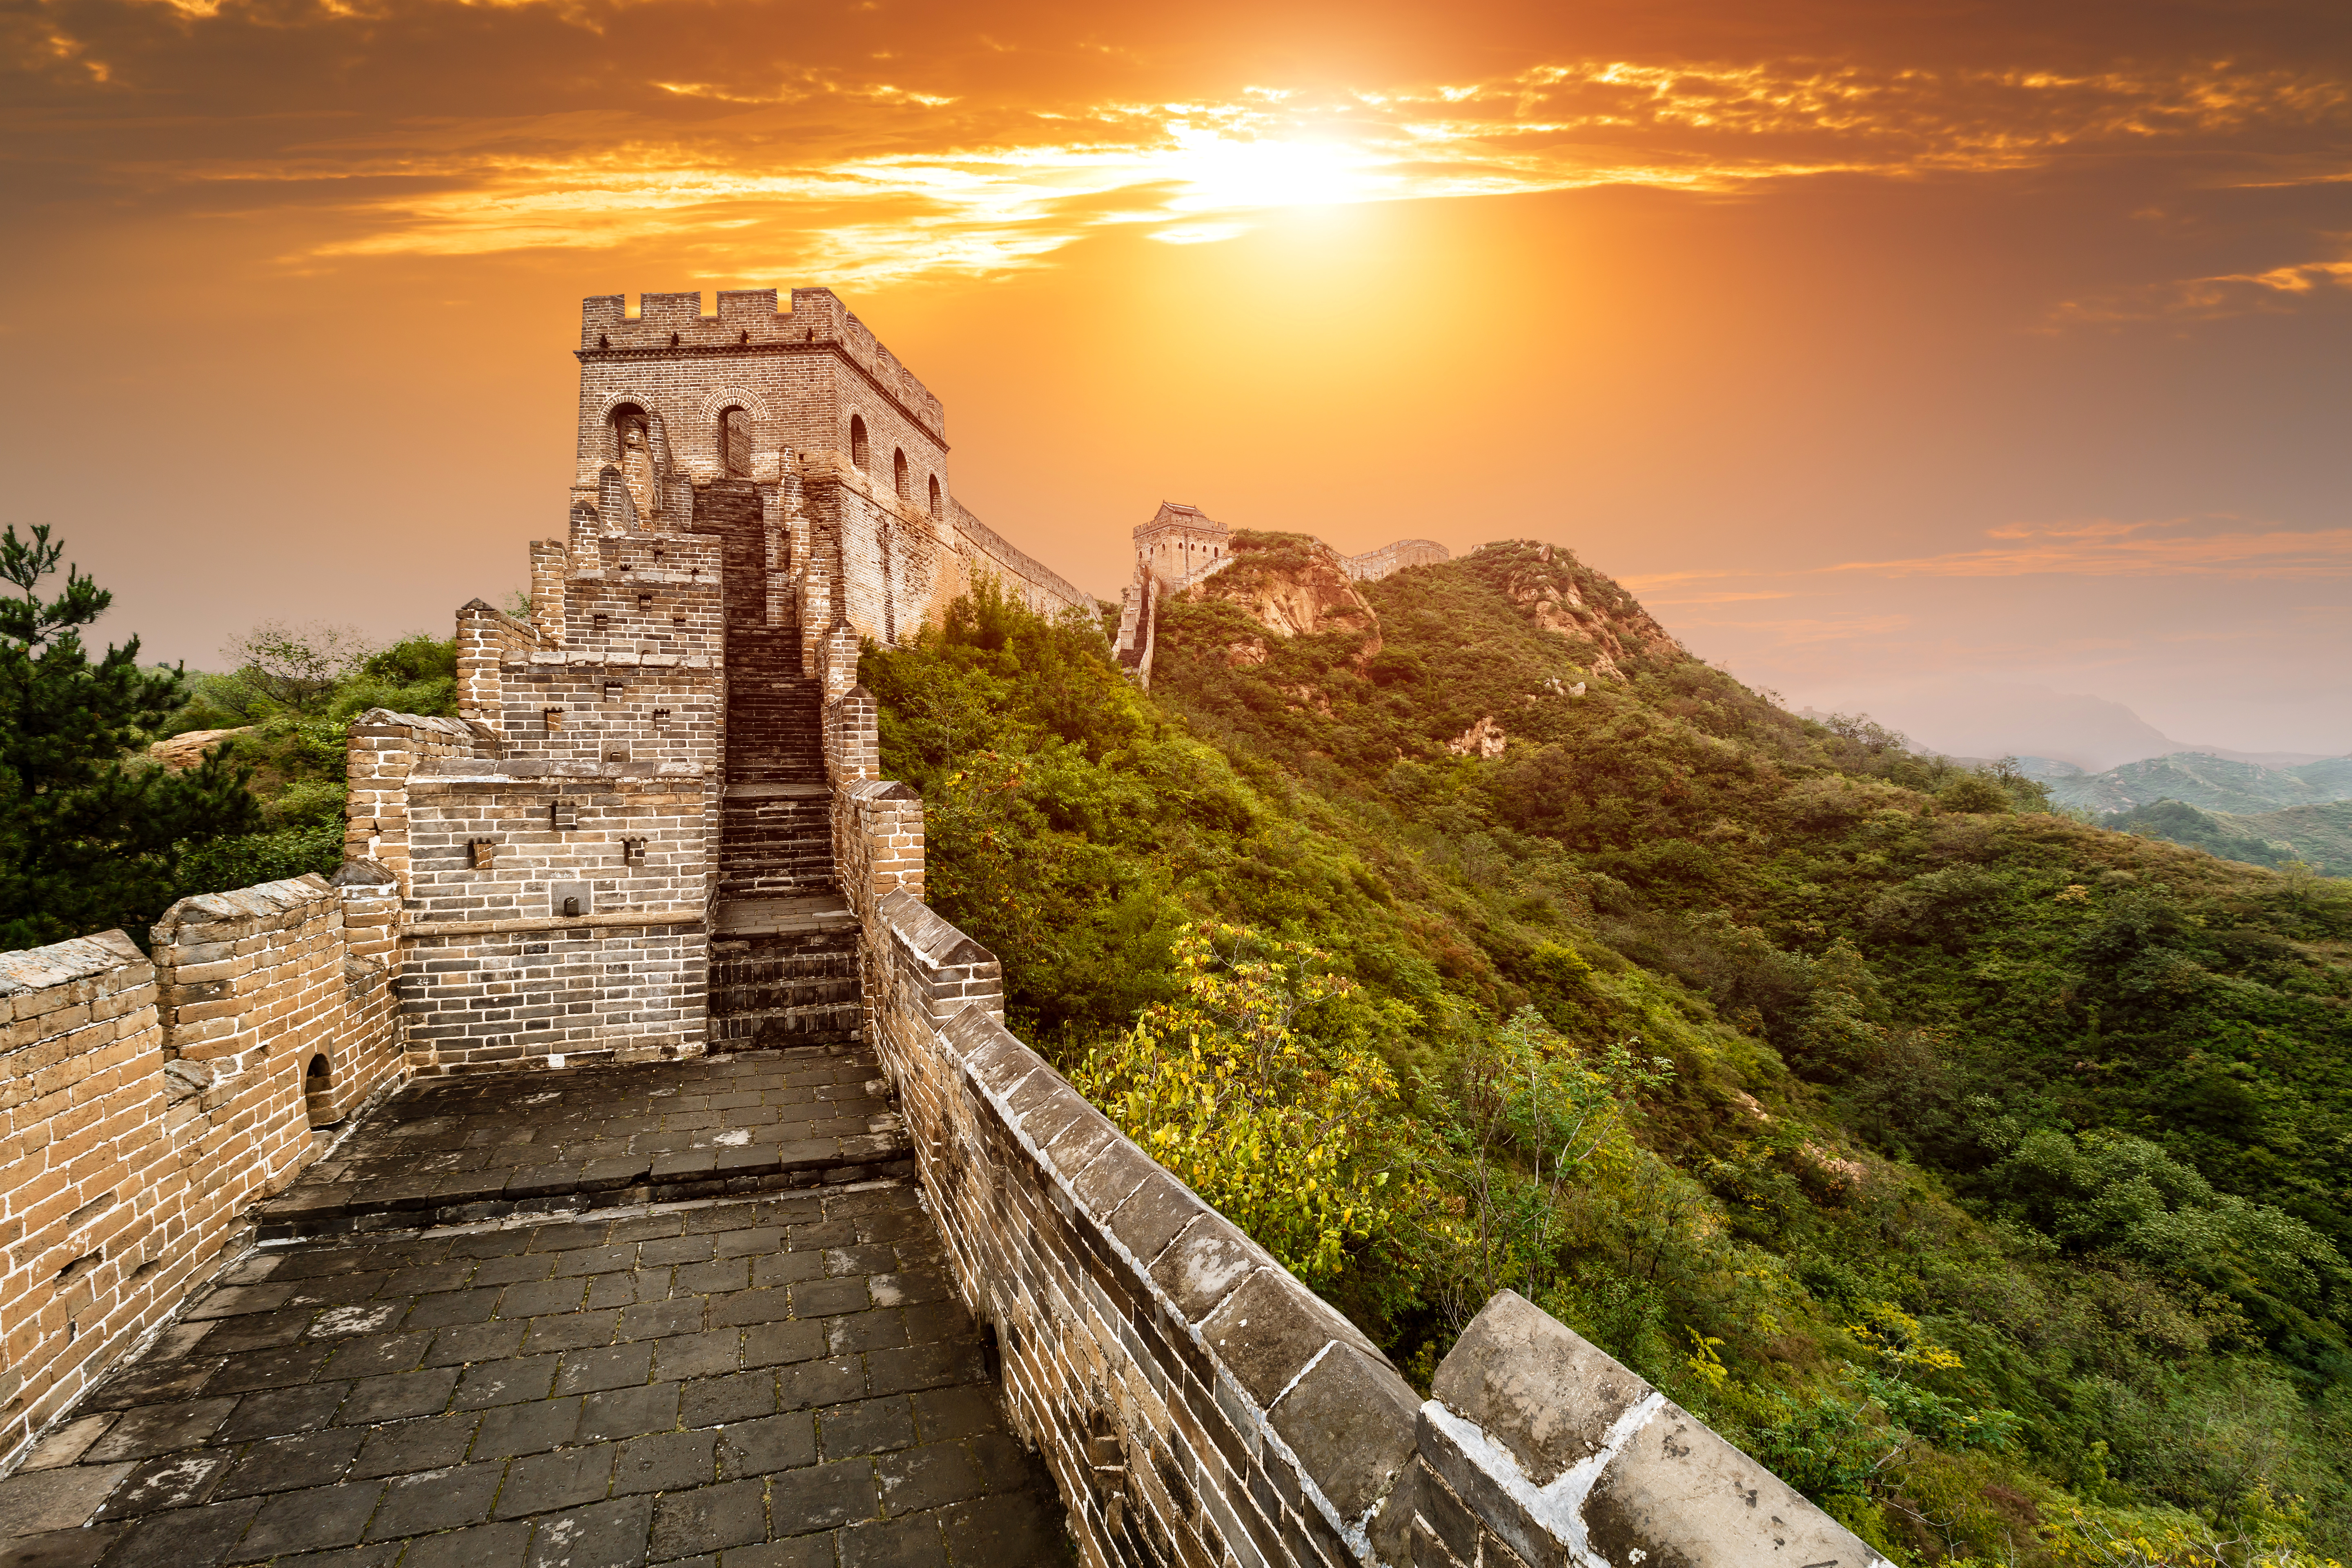 great wall of china, china, man made, landscape, sky, sunset, monuments